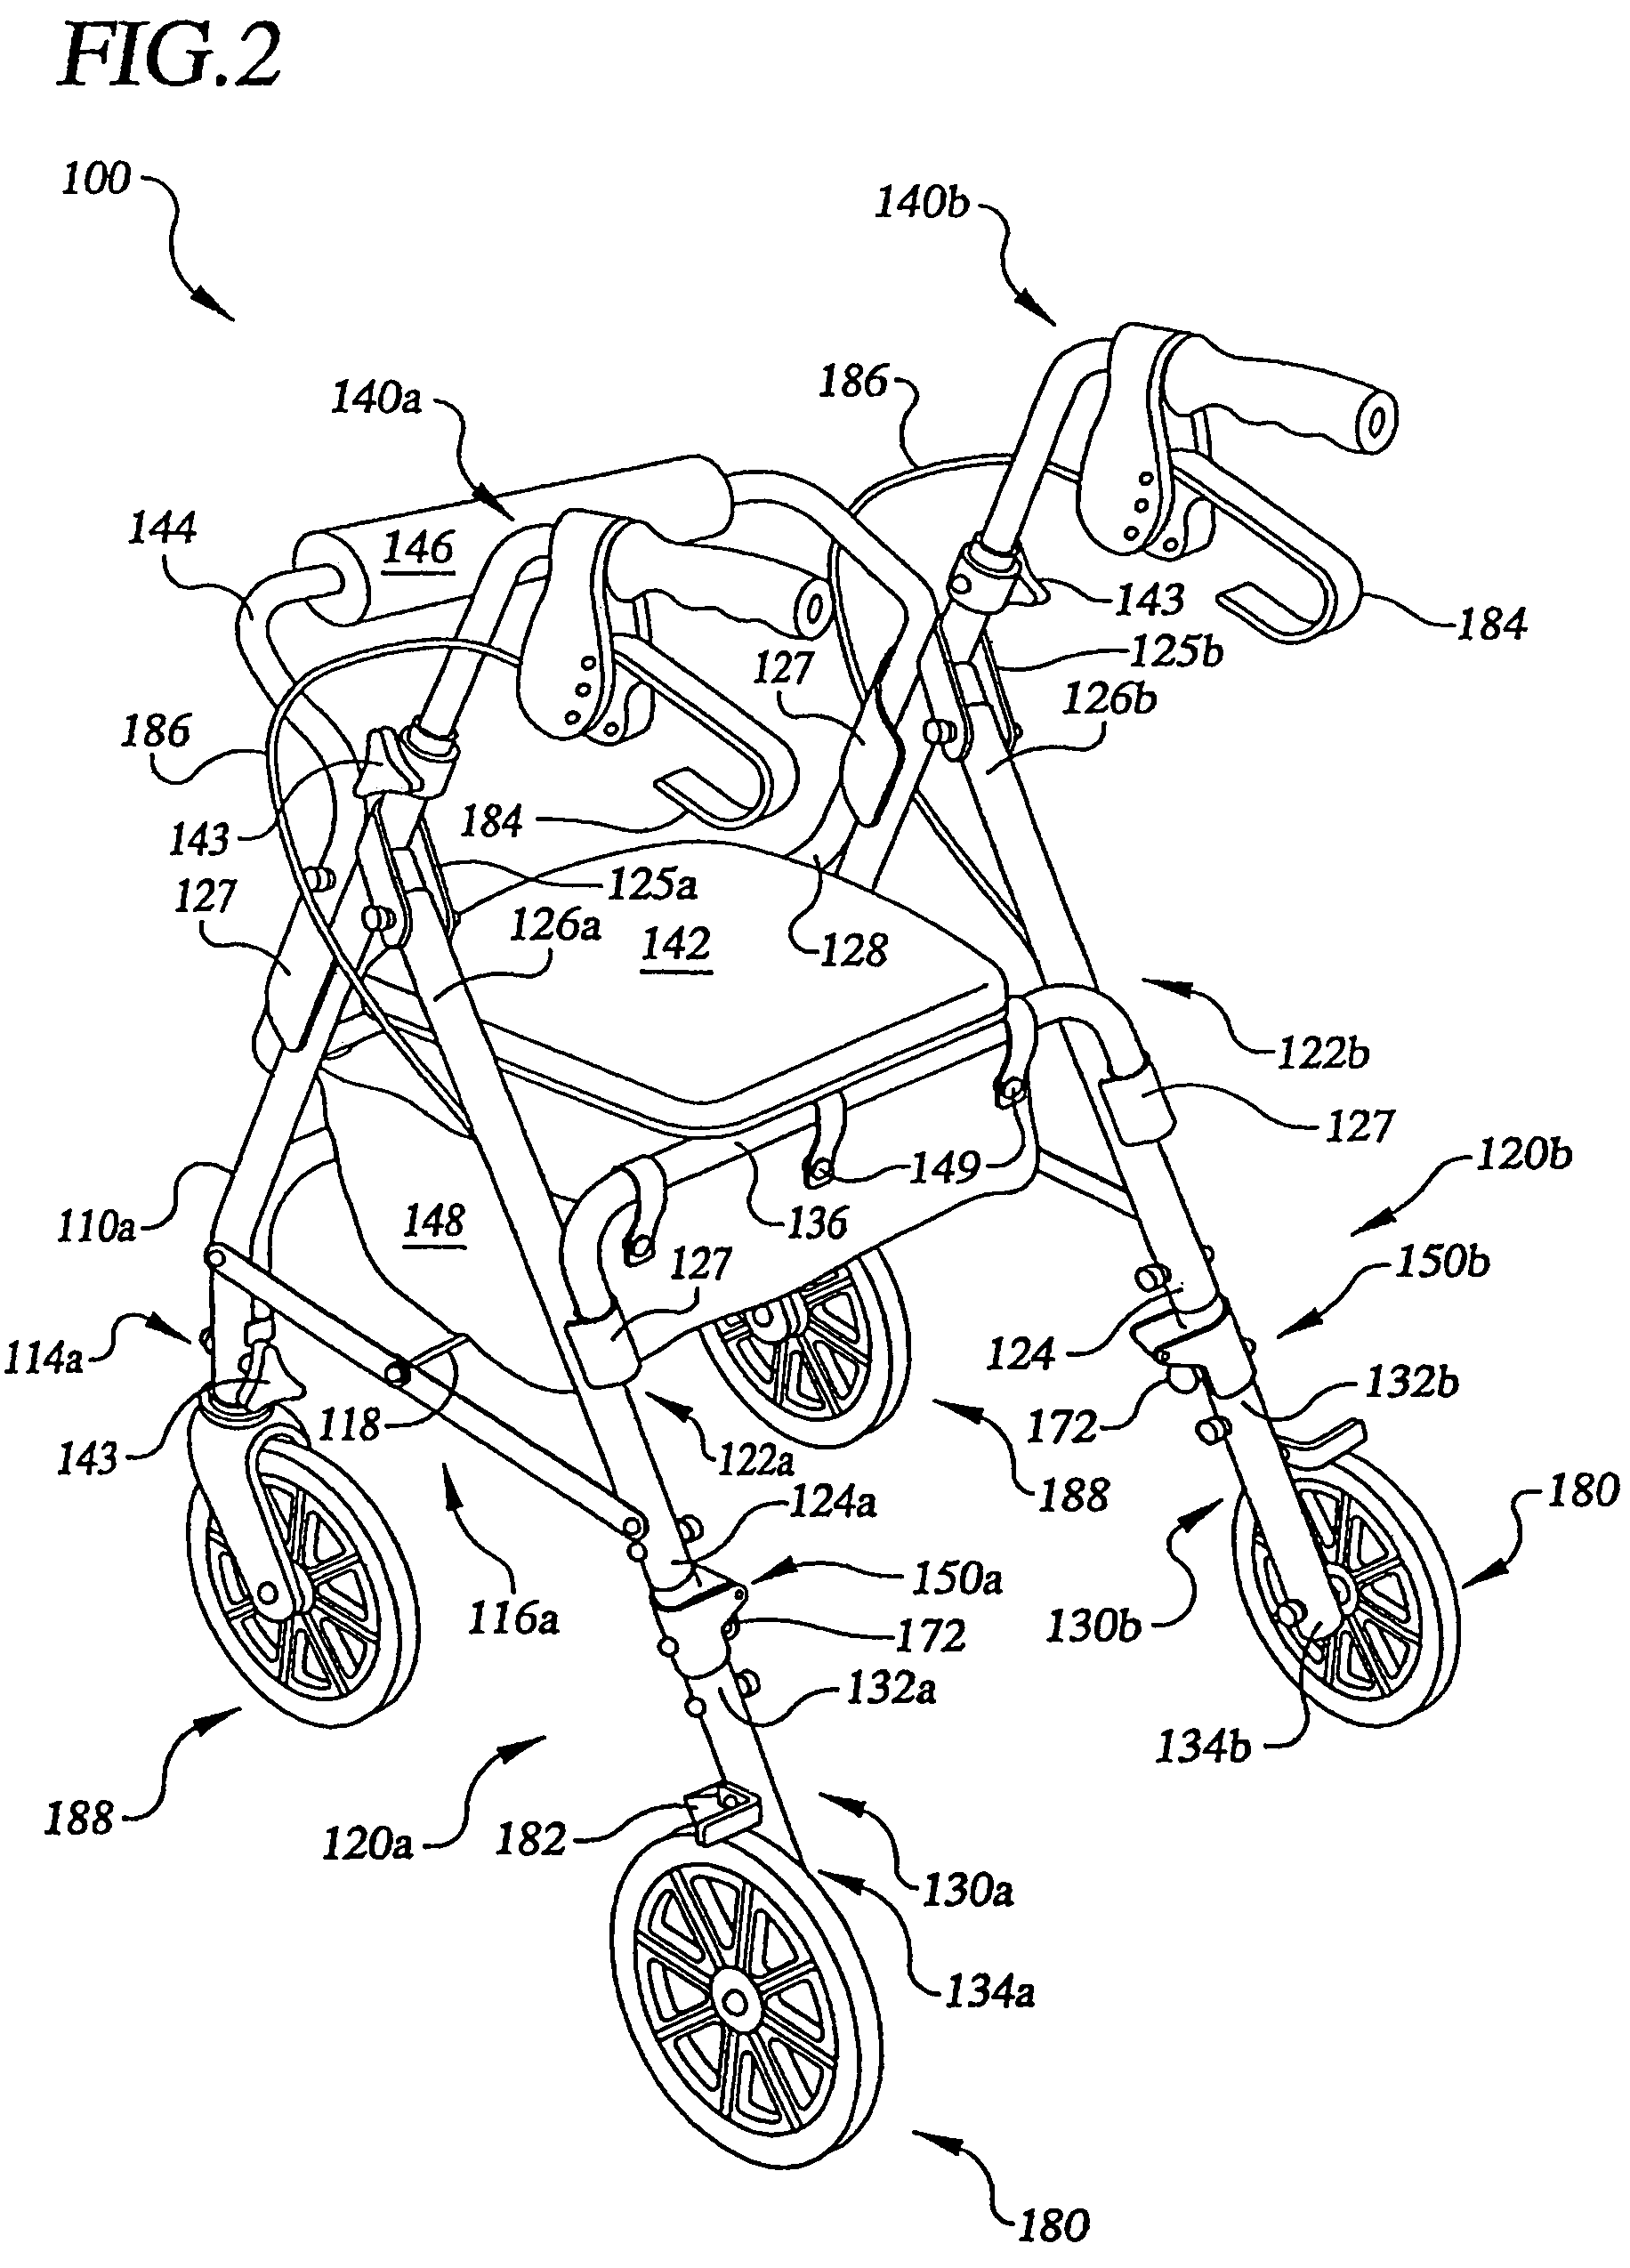 Foldable mobility support device